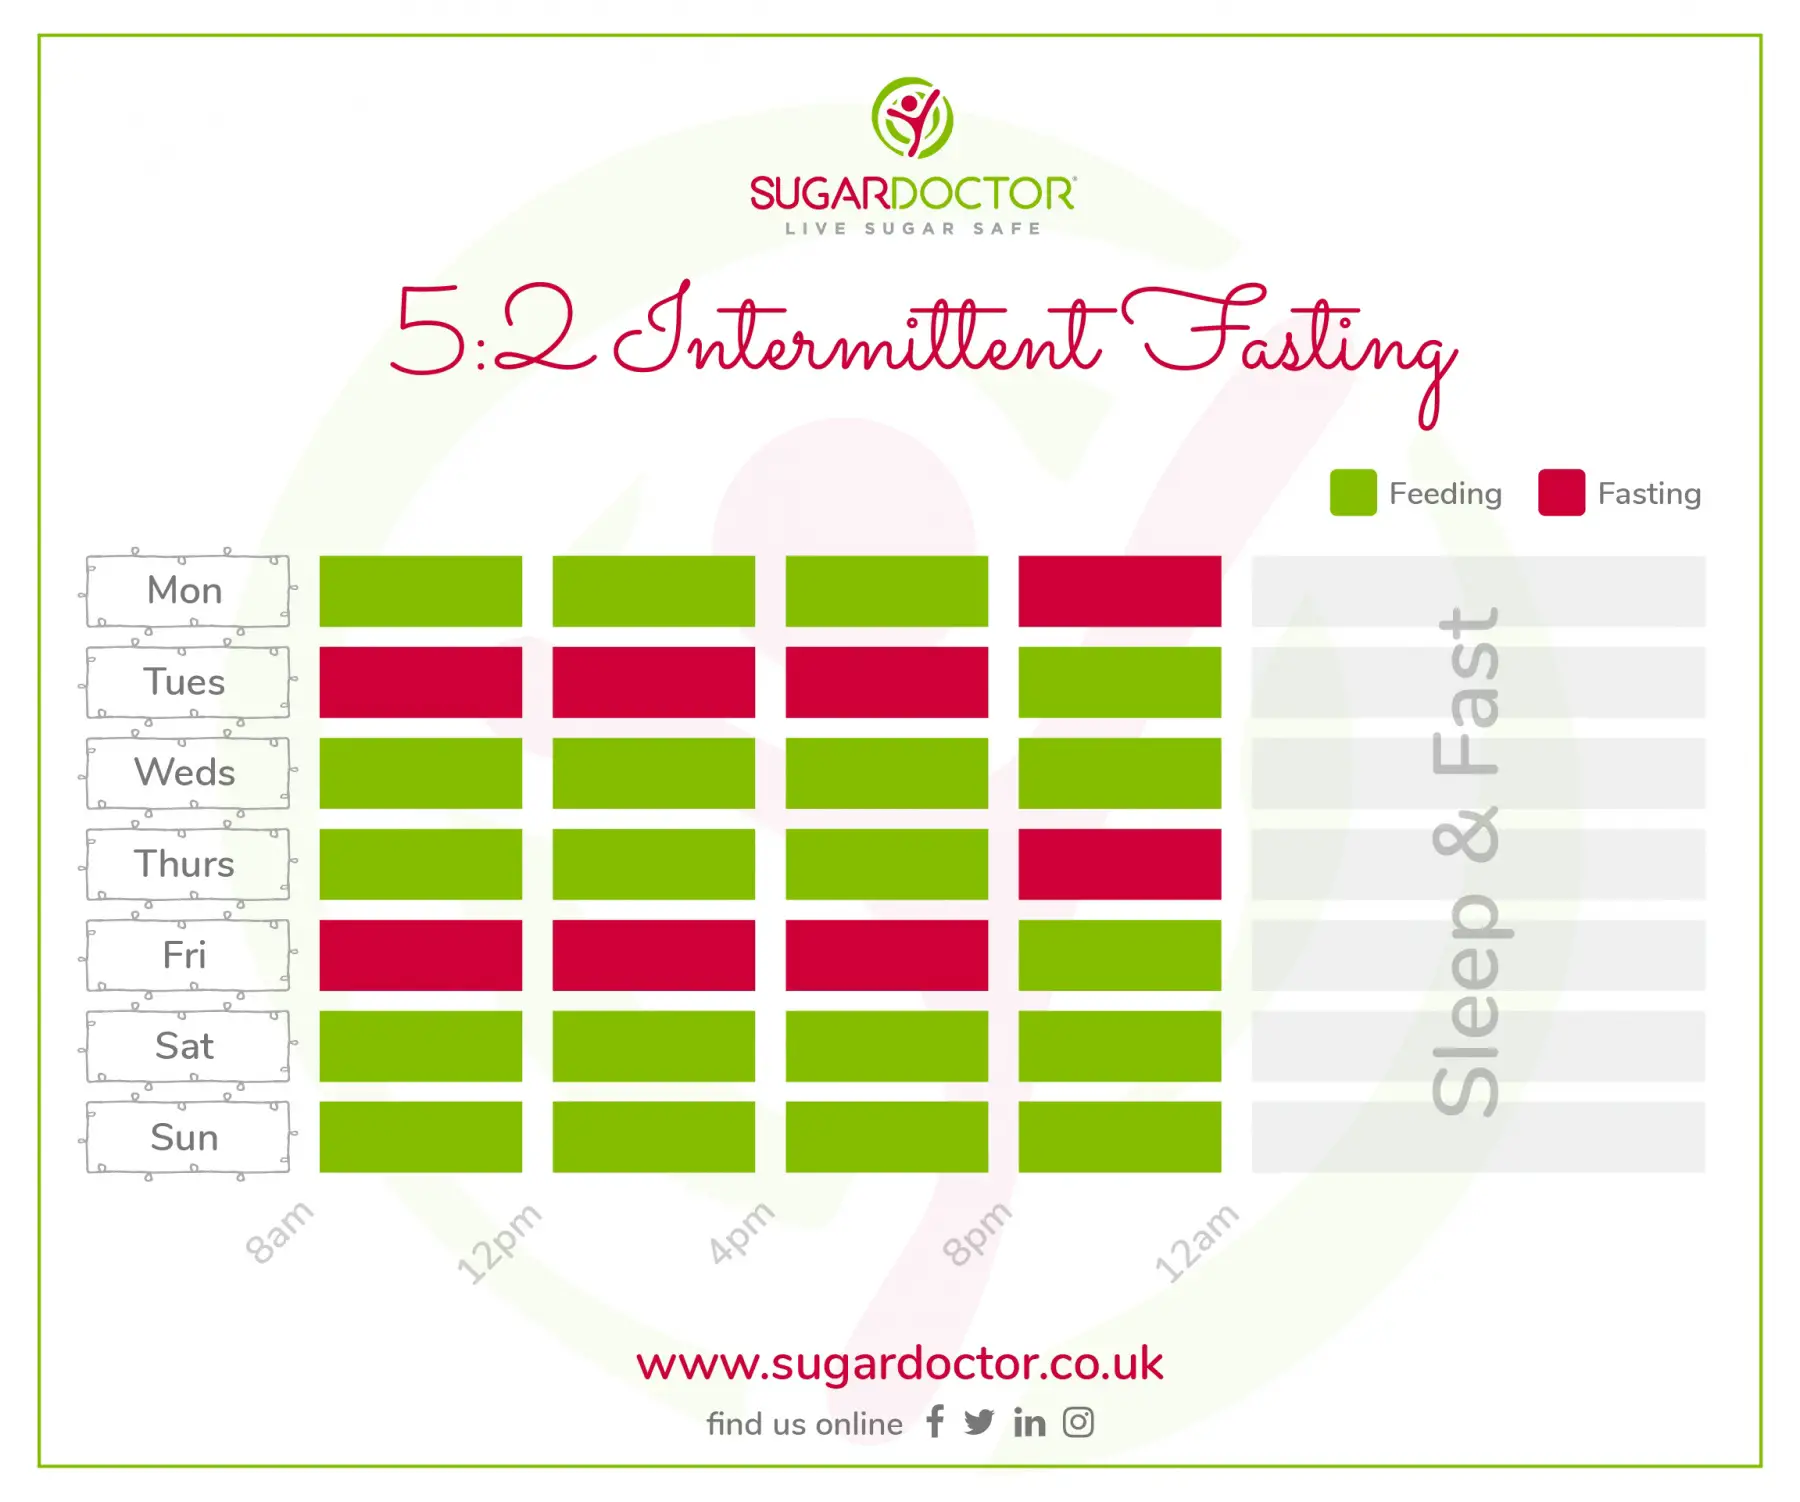 What is intermittent fasting and why is it beneficial?